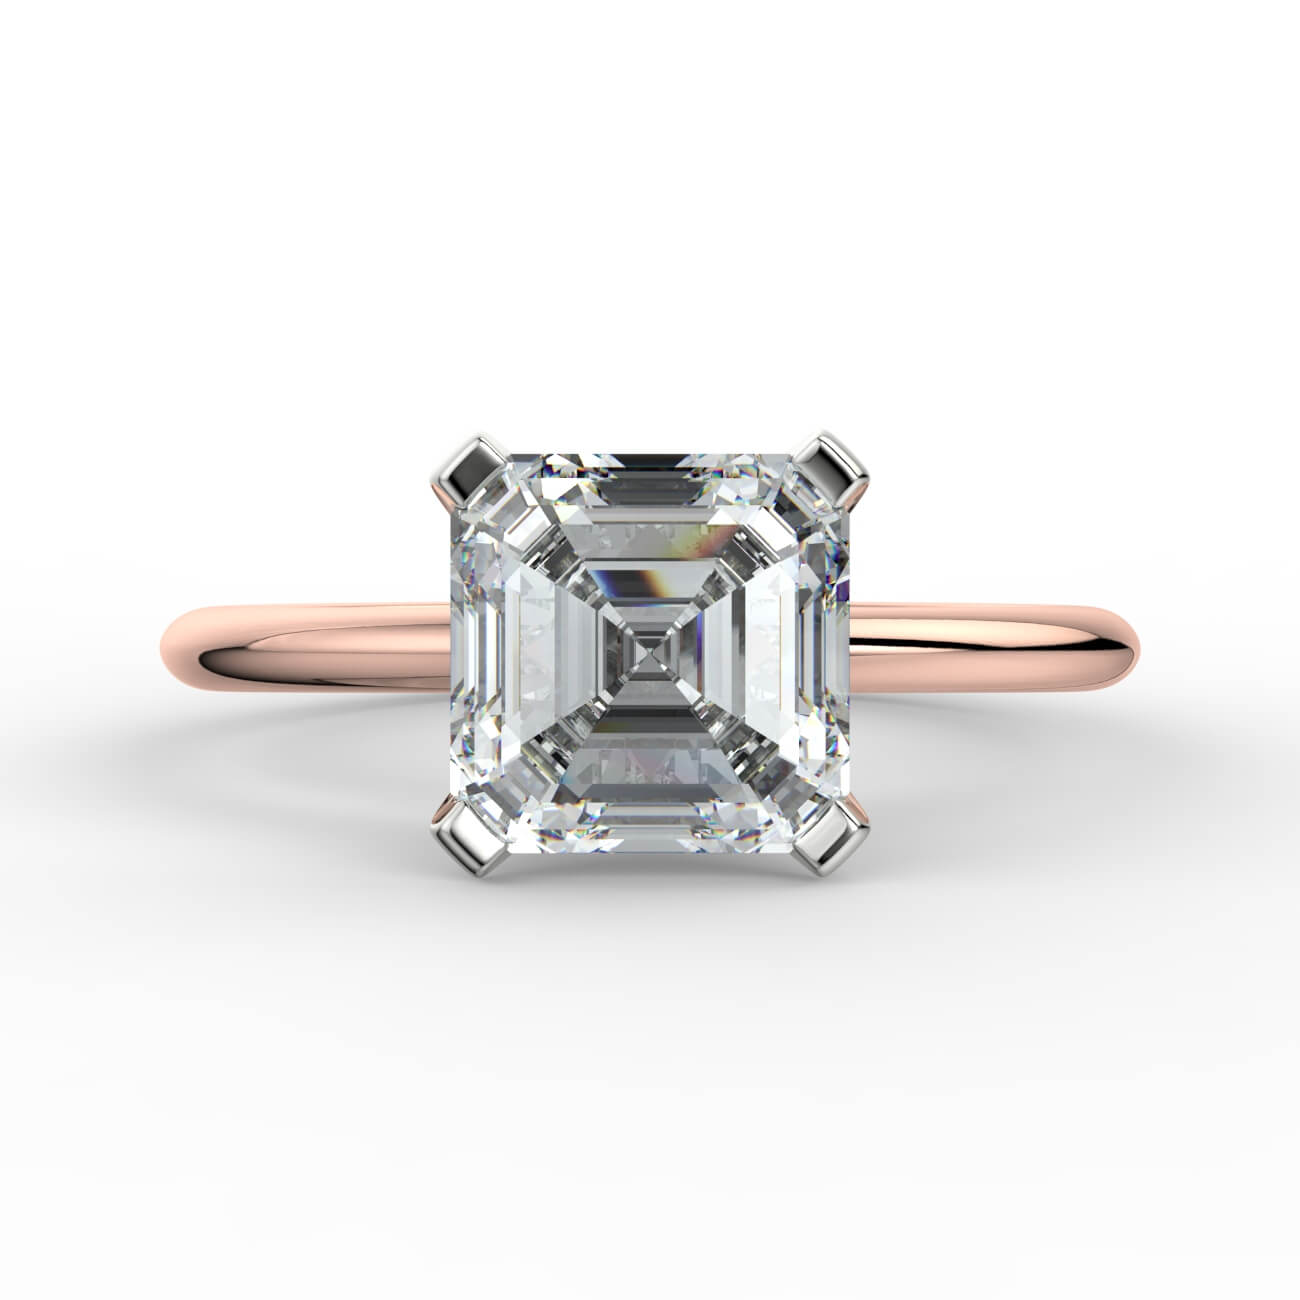 Knife-edge solitaire asscher cut diamond engagement ring in rose and white gold – Australian Diamond Network